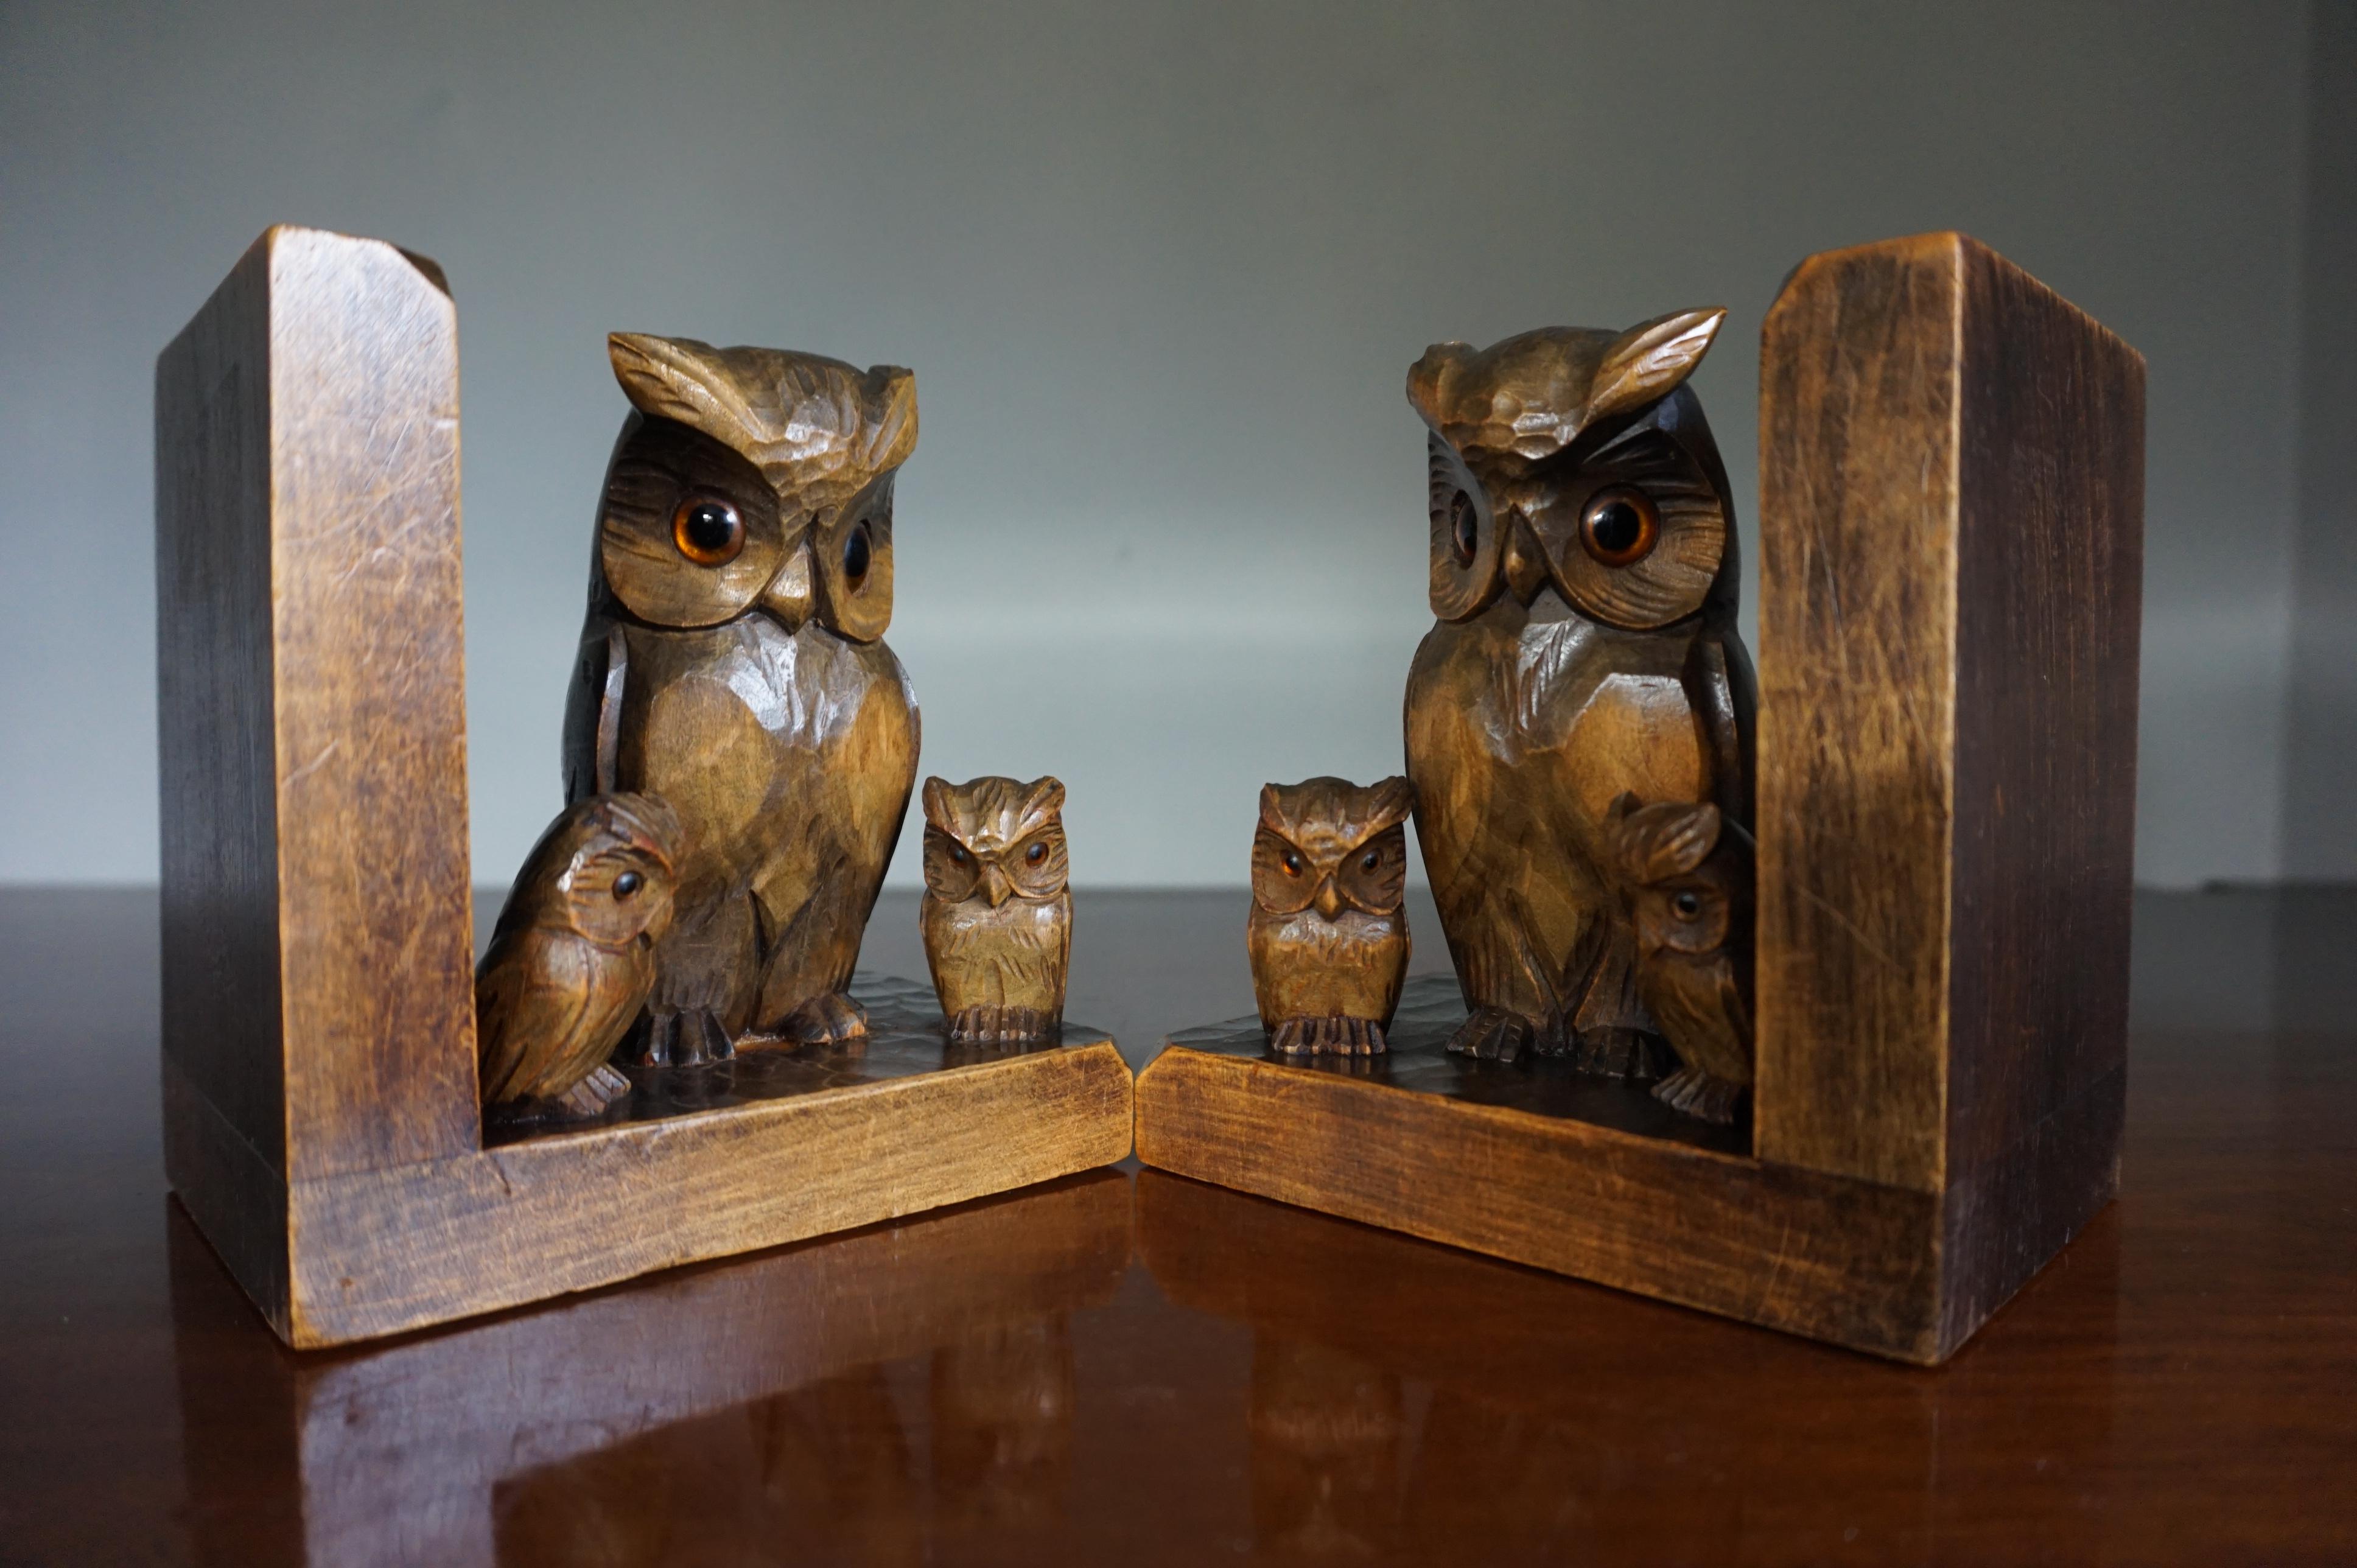 Early 20th Century Art Deco Era Bookends W. Hand Carved Family of Owl Sculptures 6